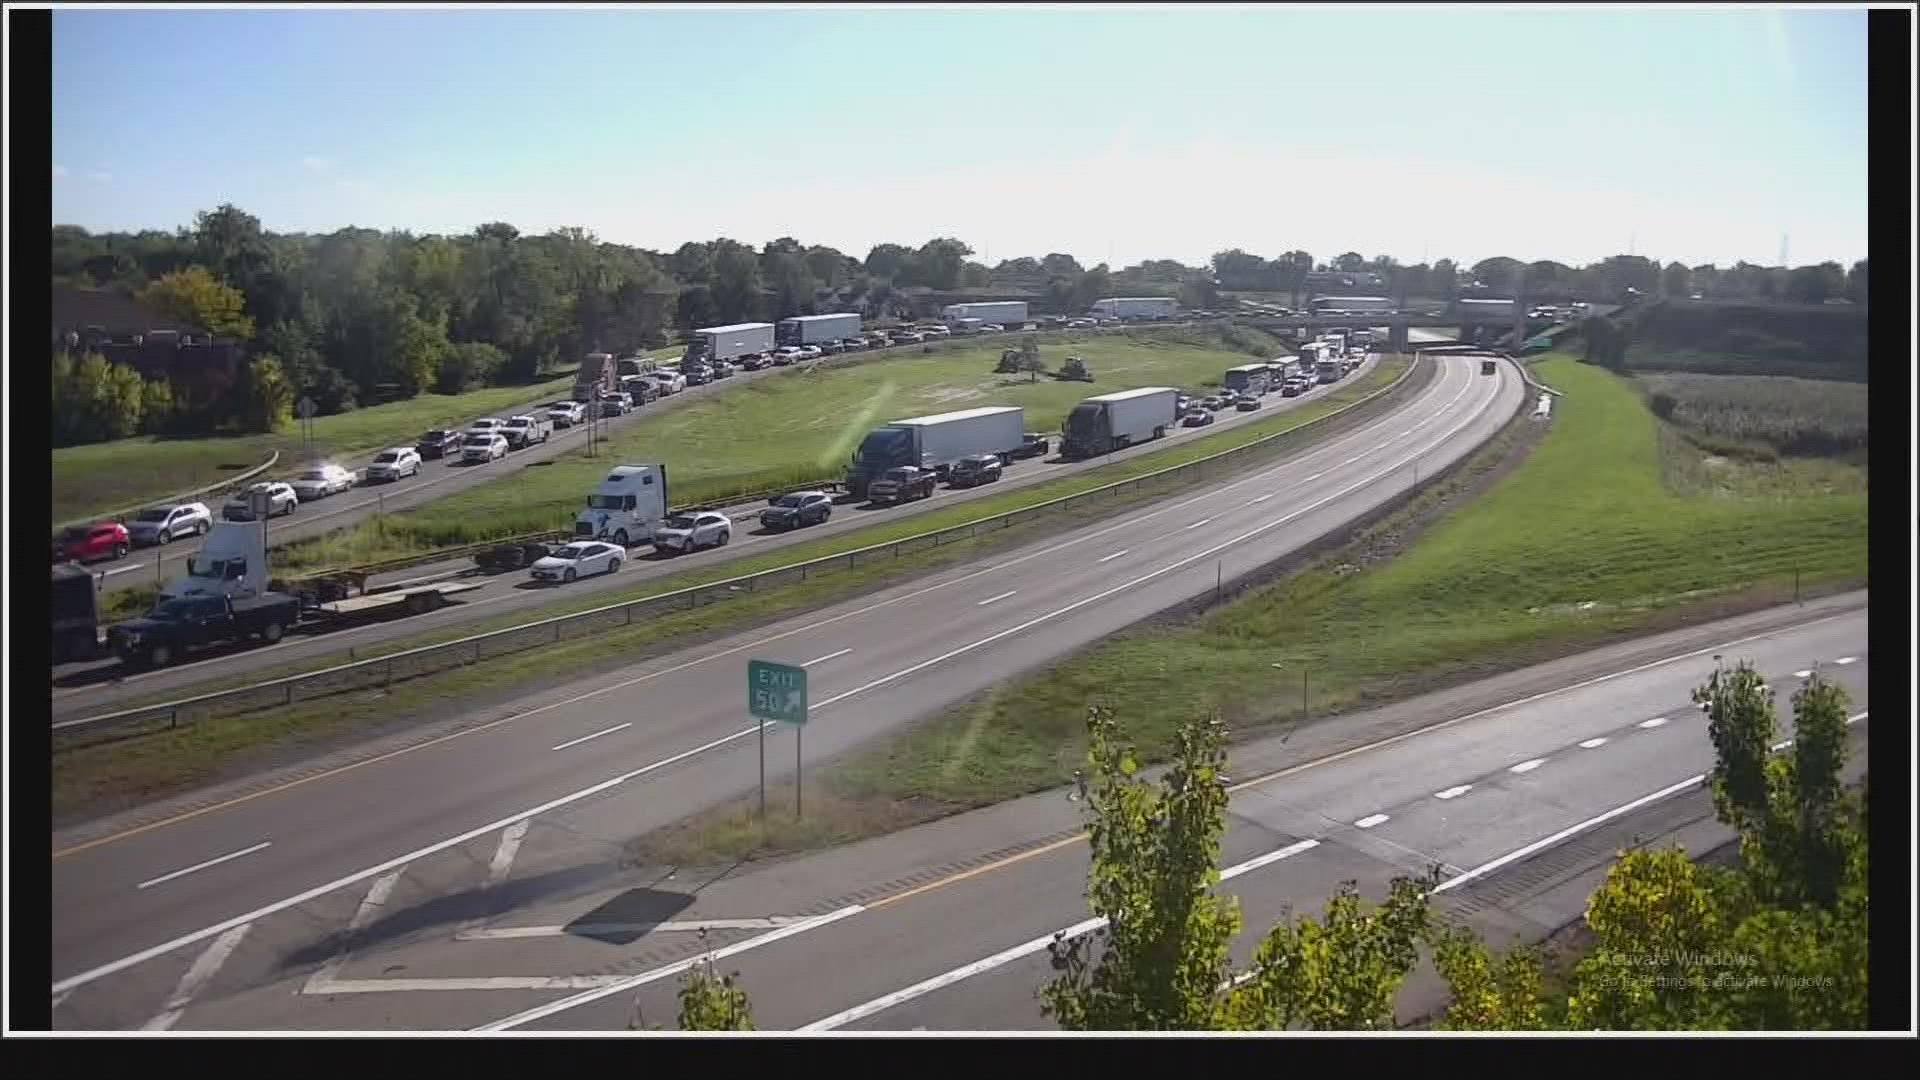 The I-90 eastbound is closed at exit 49 (Depew) due to the accident. Traffic is backed up from exit 50 (I-290) to exit 49.